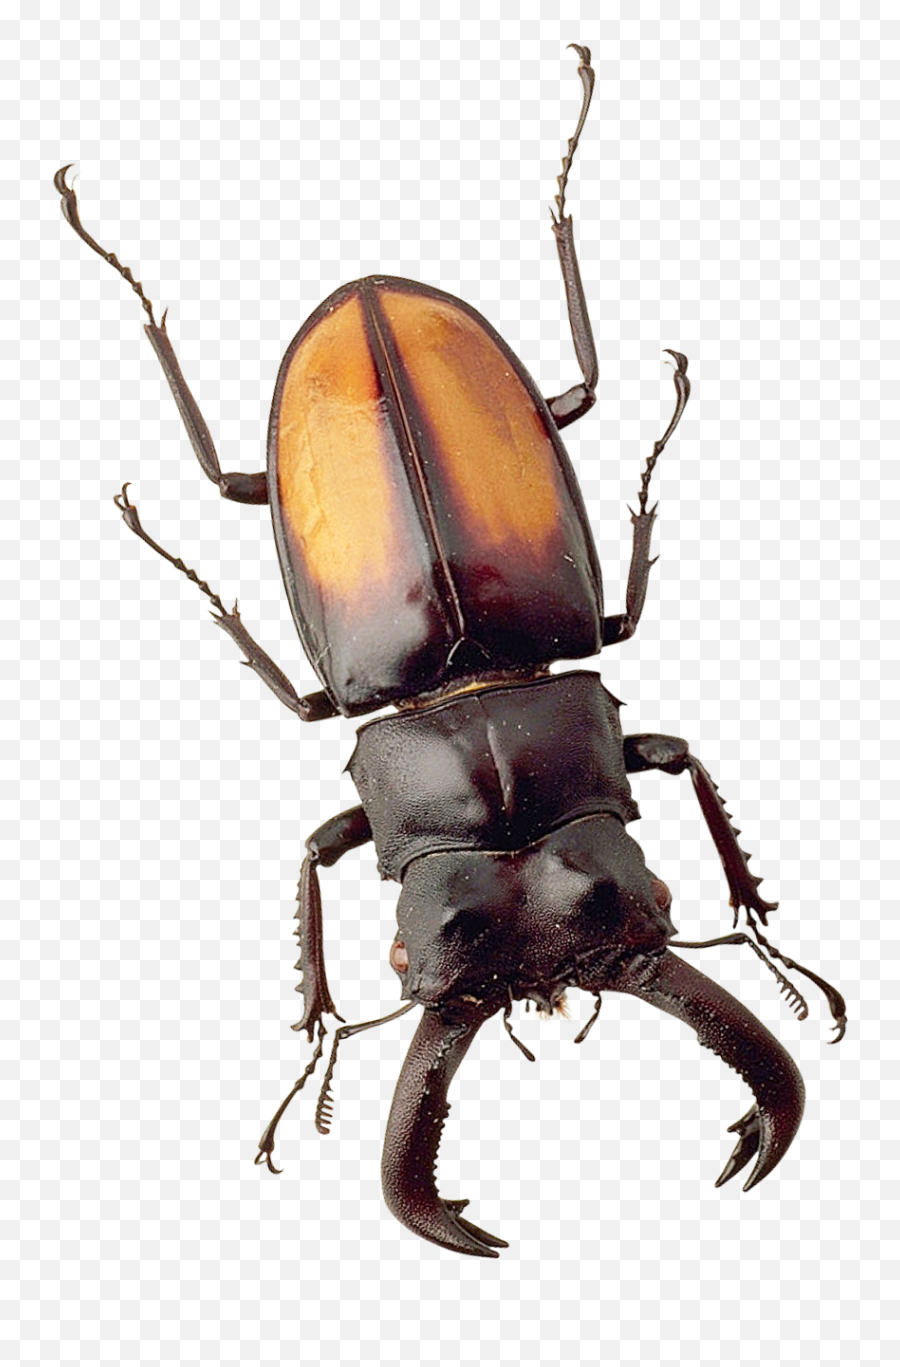 Beetle Png Image For Free Download